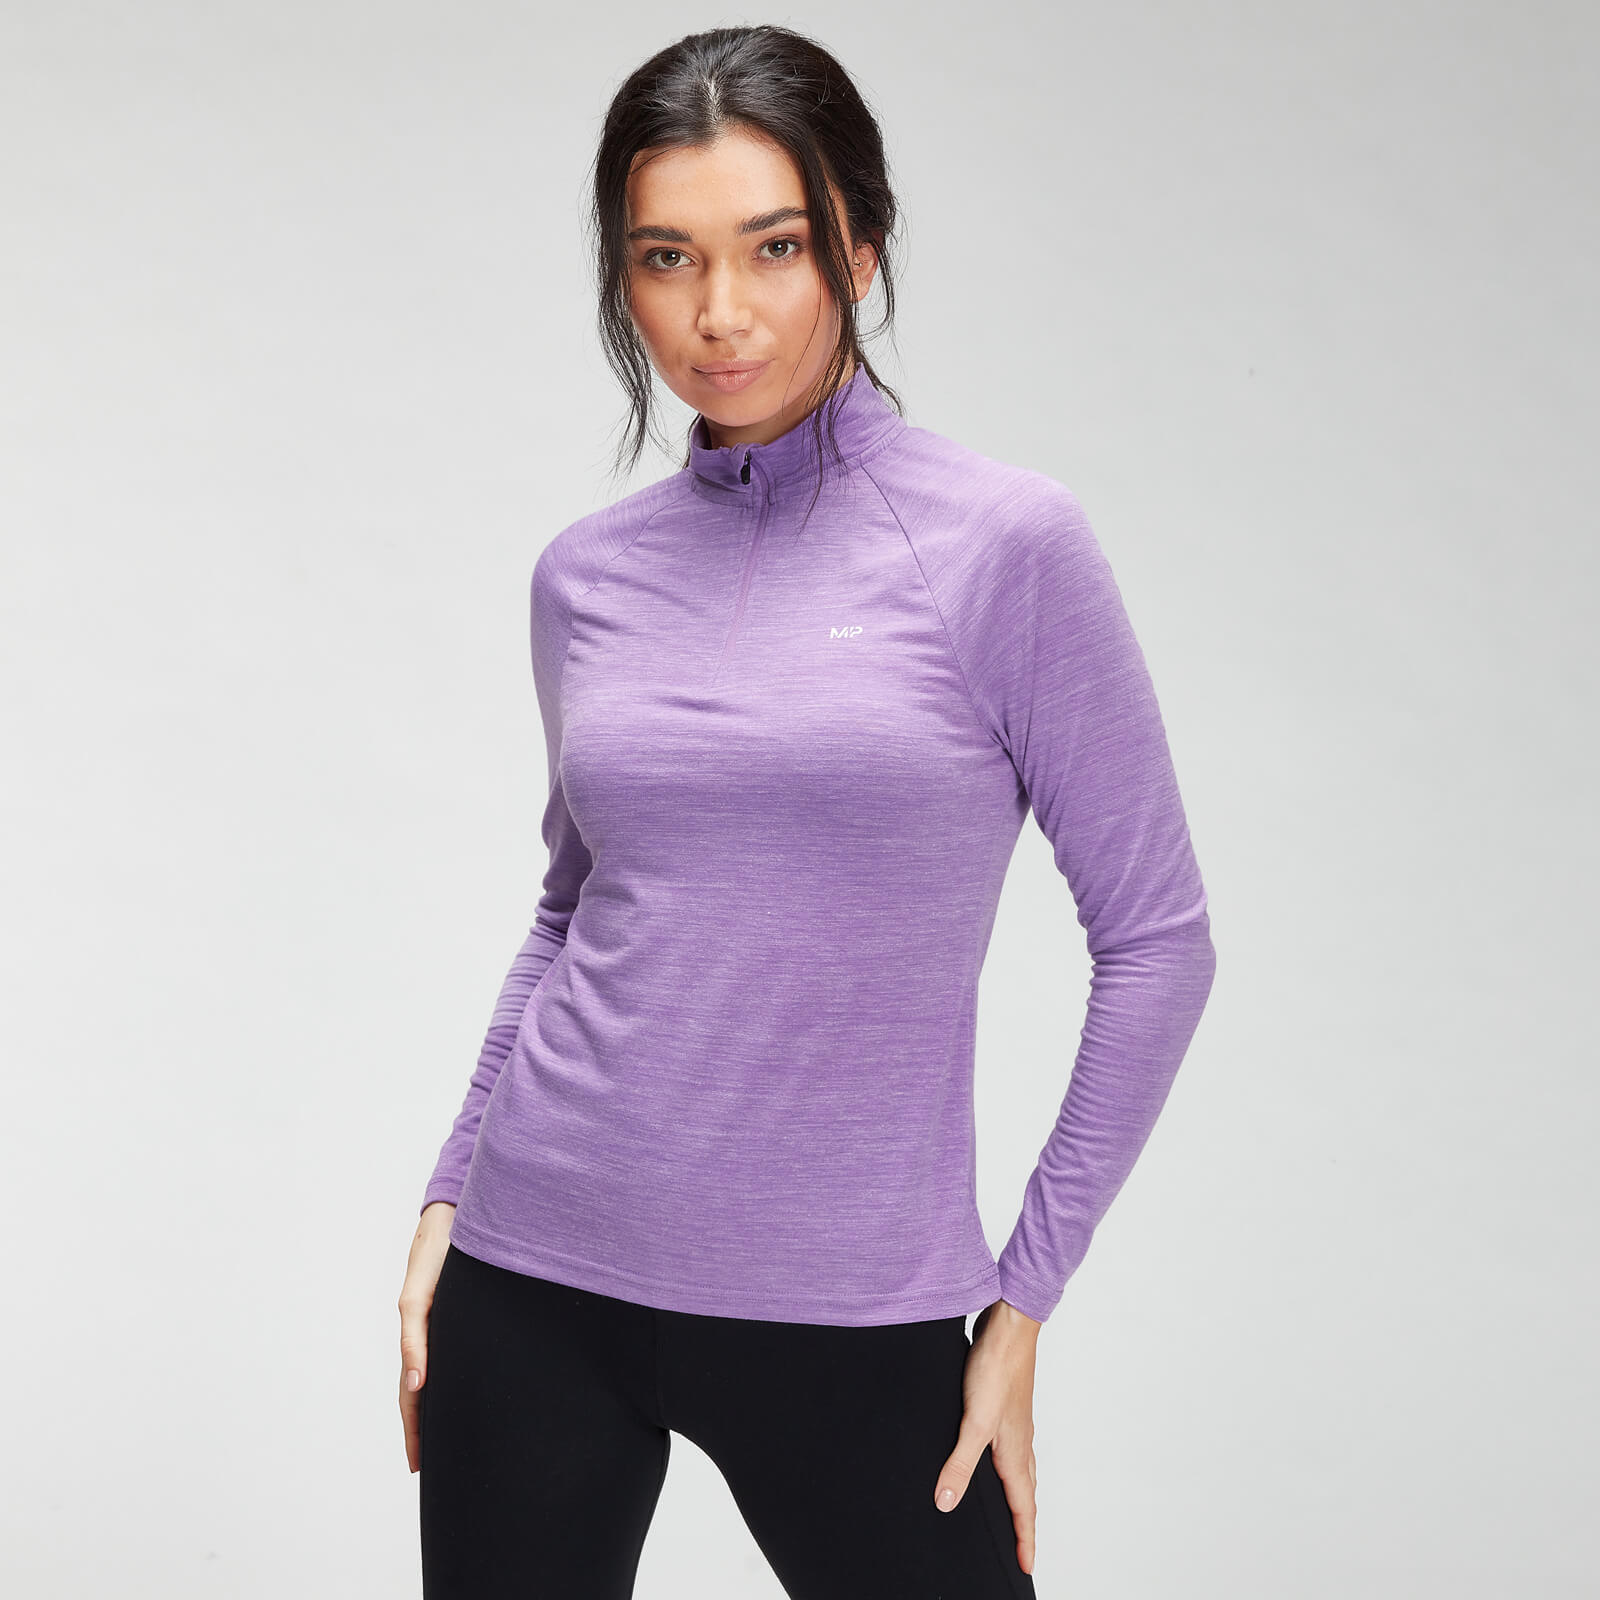 MP Women's Performance Training 1/4 Zip Top - Deep Lilac Marl with White Fleck - XS